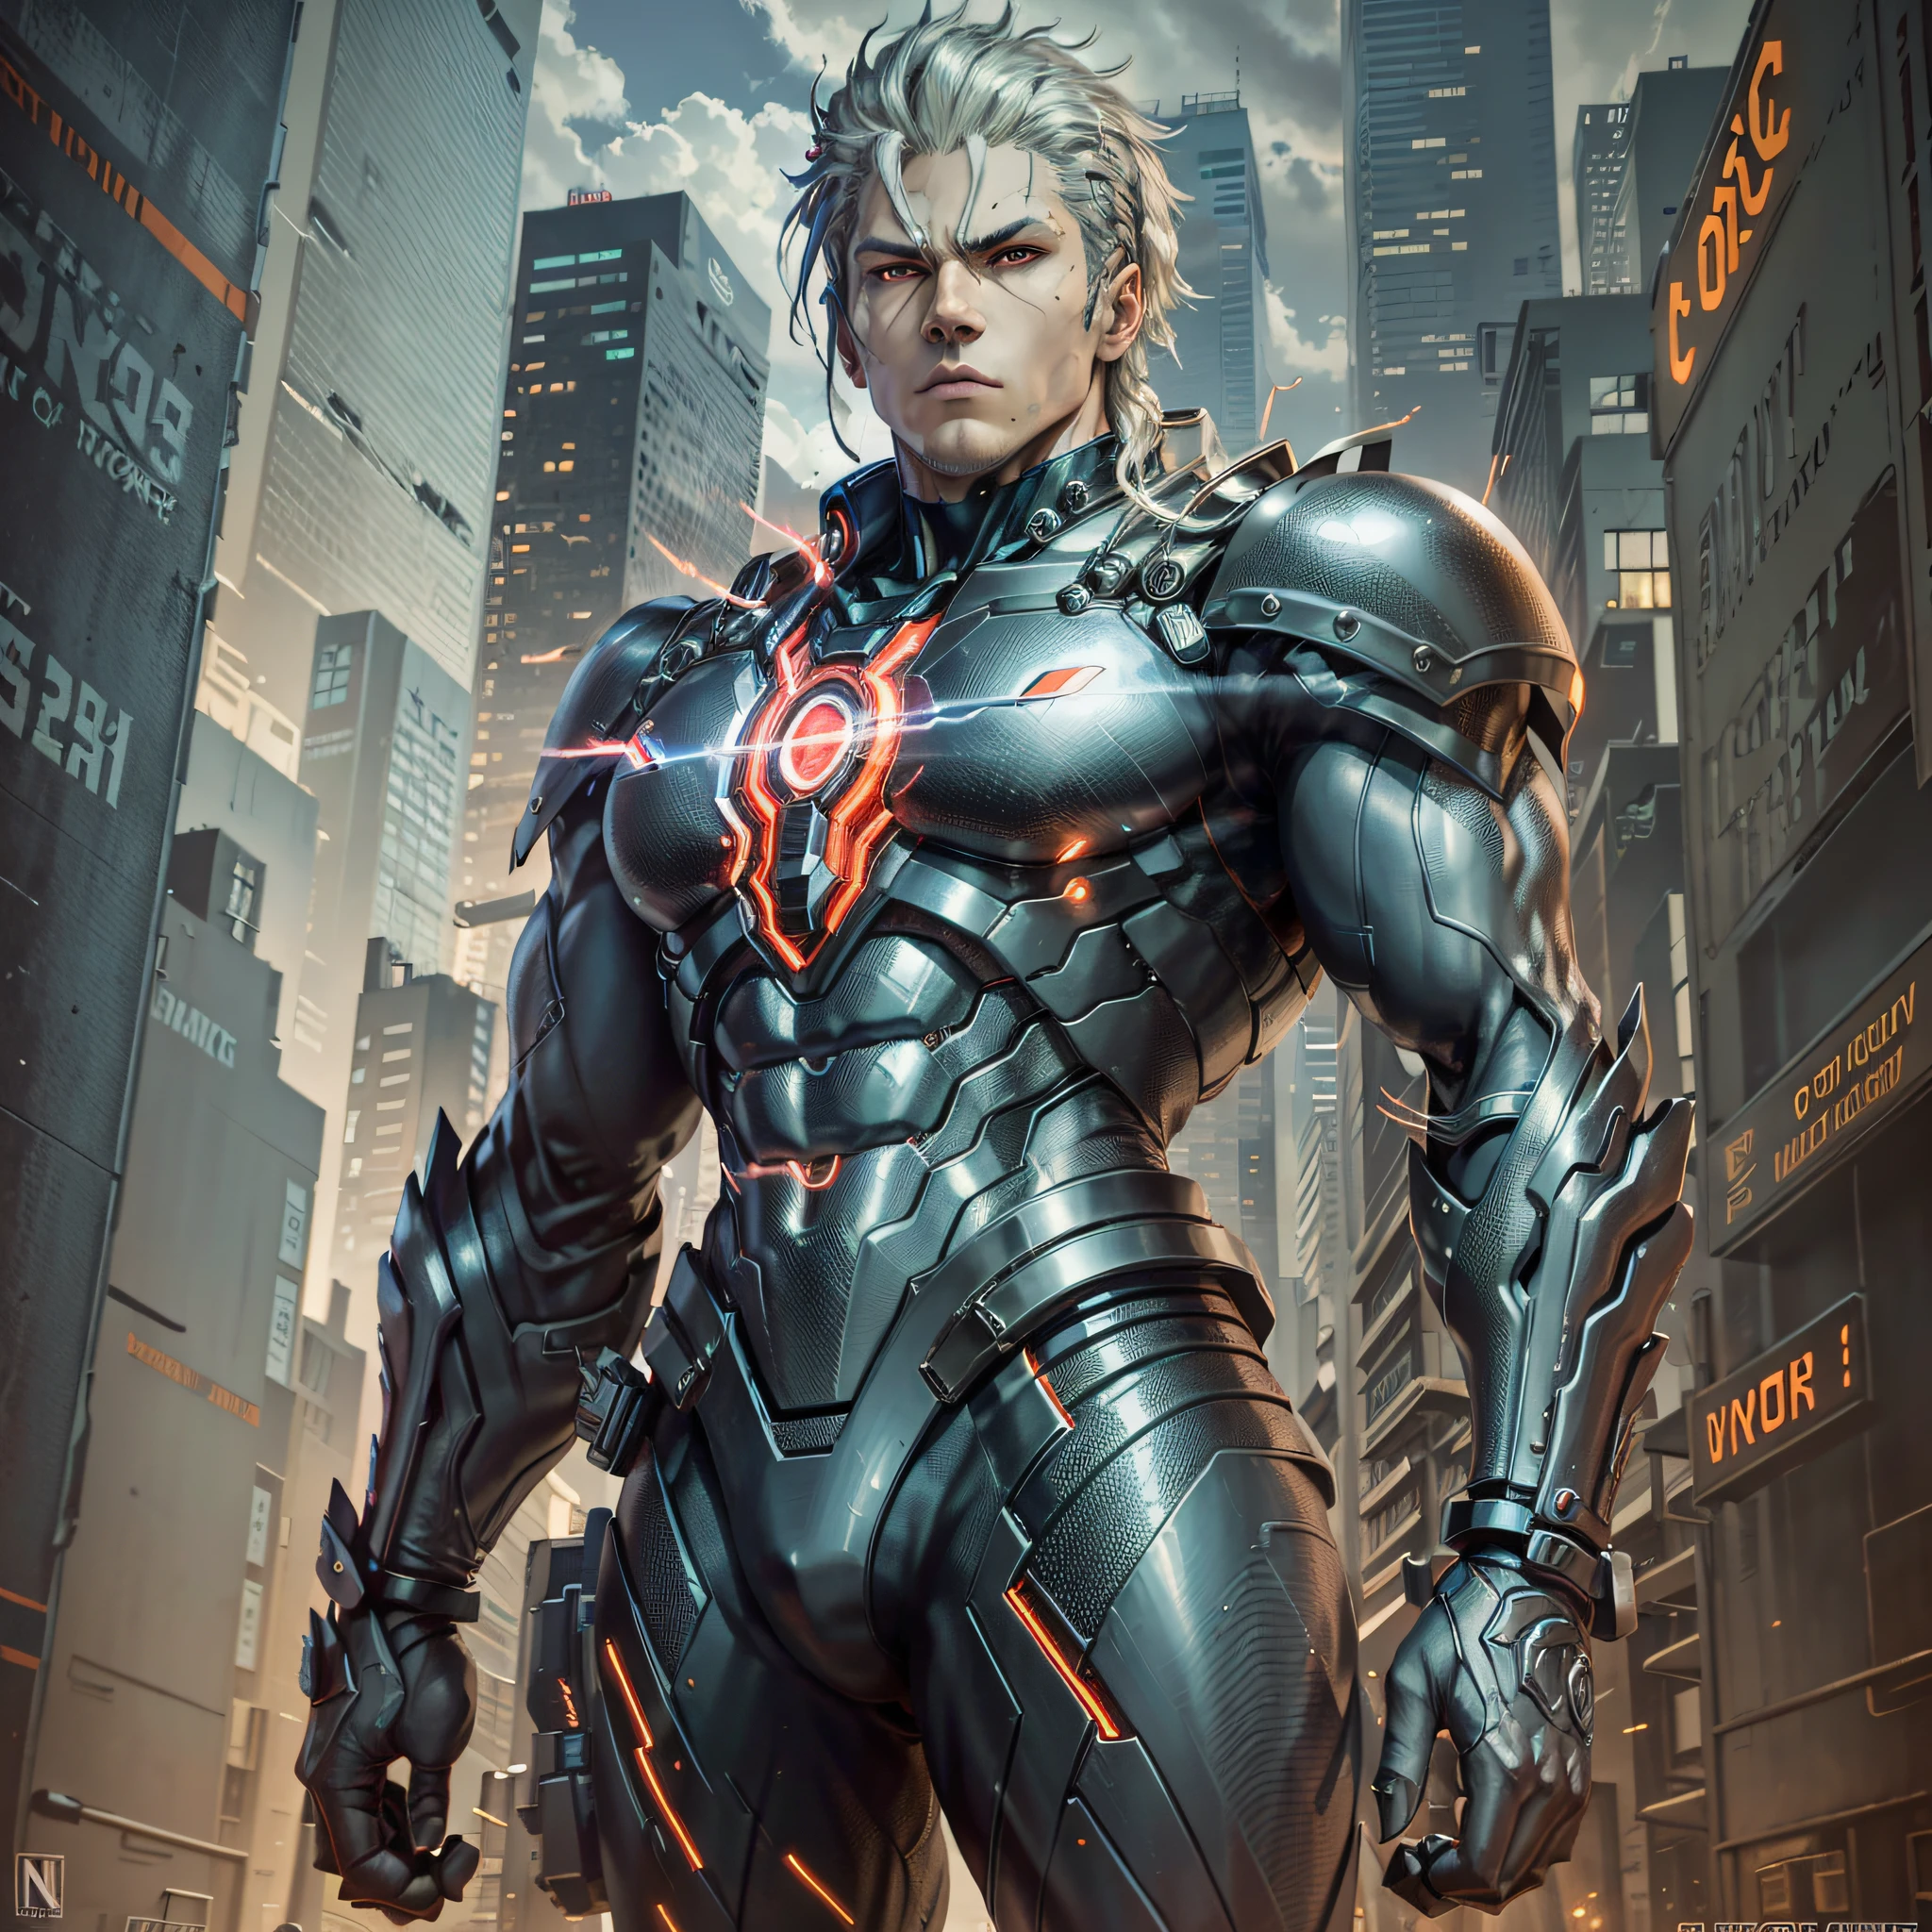 Generate an image of a male cyborg named Kyros with unparalleled strength and technological prowess. He has a sleek and muscular build, with a head adorned with glowing red cybernetic eyes and a neural interface. He wears a black and silver suit with advanced armor plating and a red glowing power core on his chest. In his hands, he wields a pair of deadly energy blades. The background should be a futuristic cityscape with towering skyscrapers and neon lights. Anime art --auto --s2